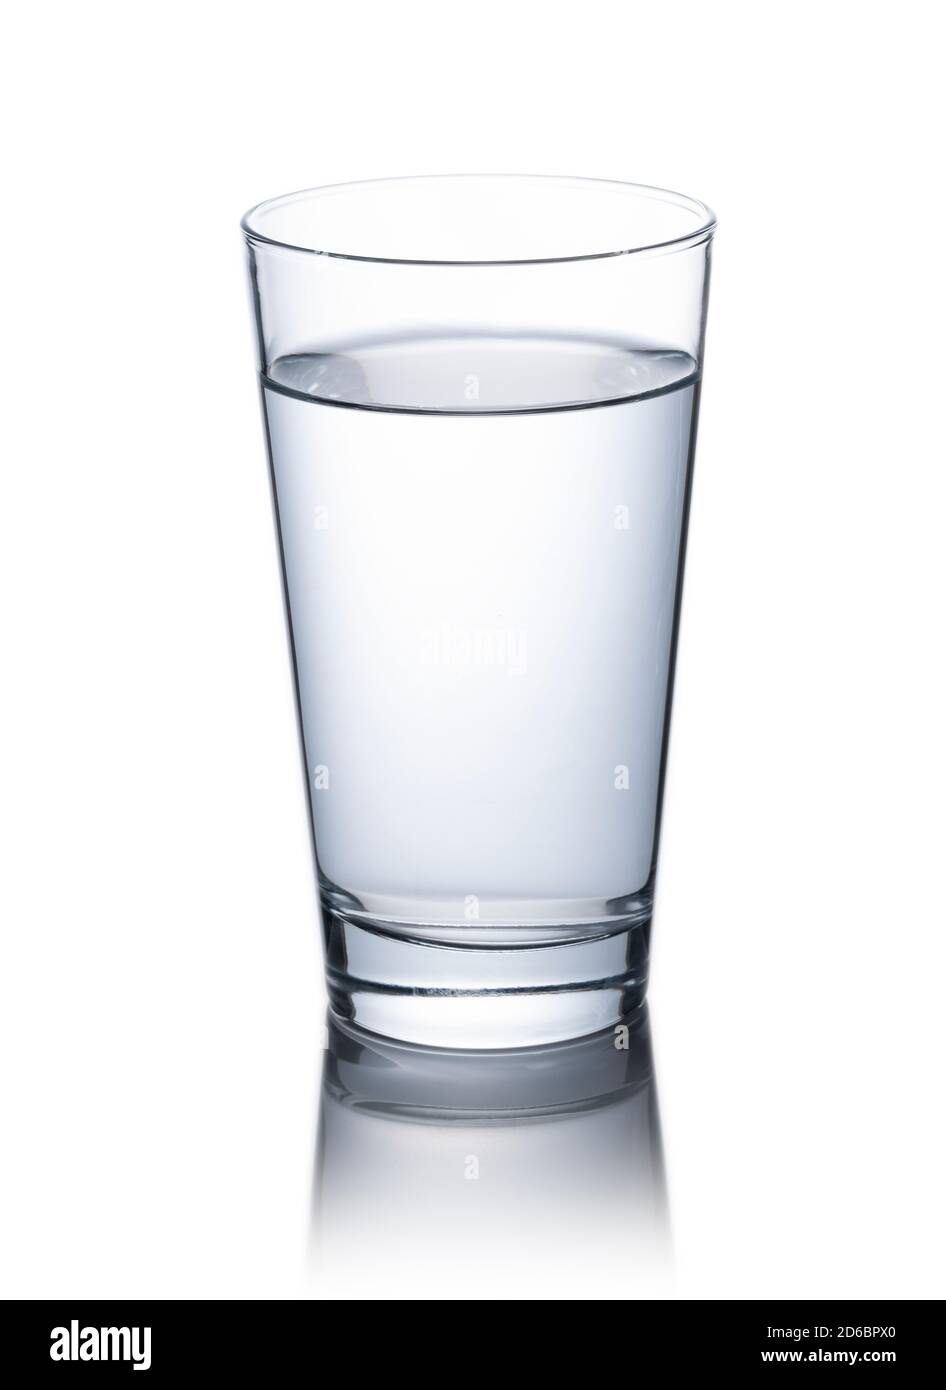 https://c8.alamy.com/comp/2D6BPX0/a-clear-glass-of-water-on-a-white-background-2D6BPX0.jpg